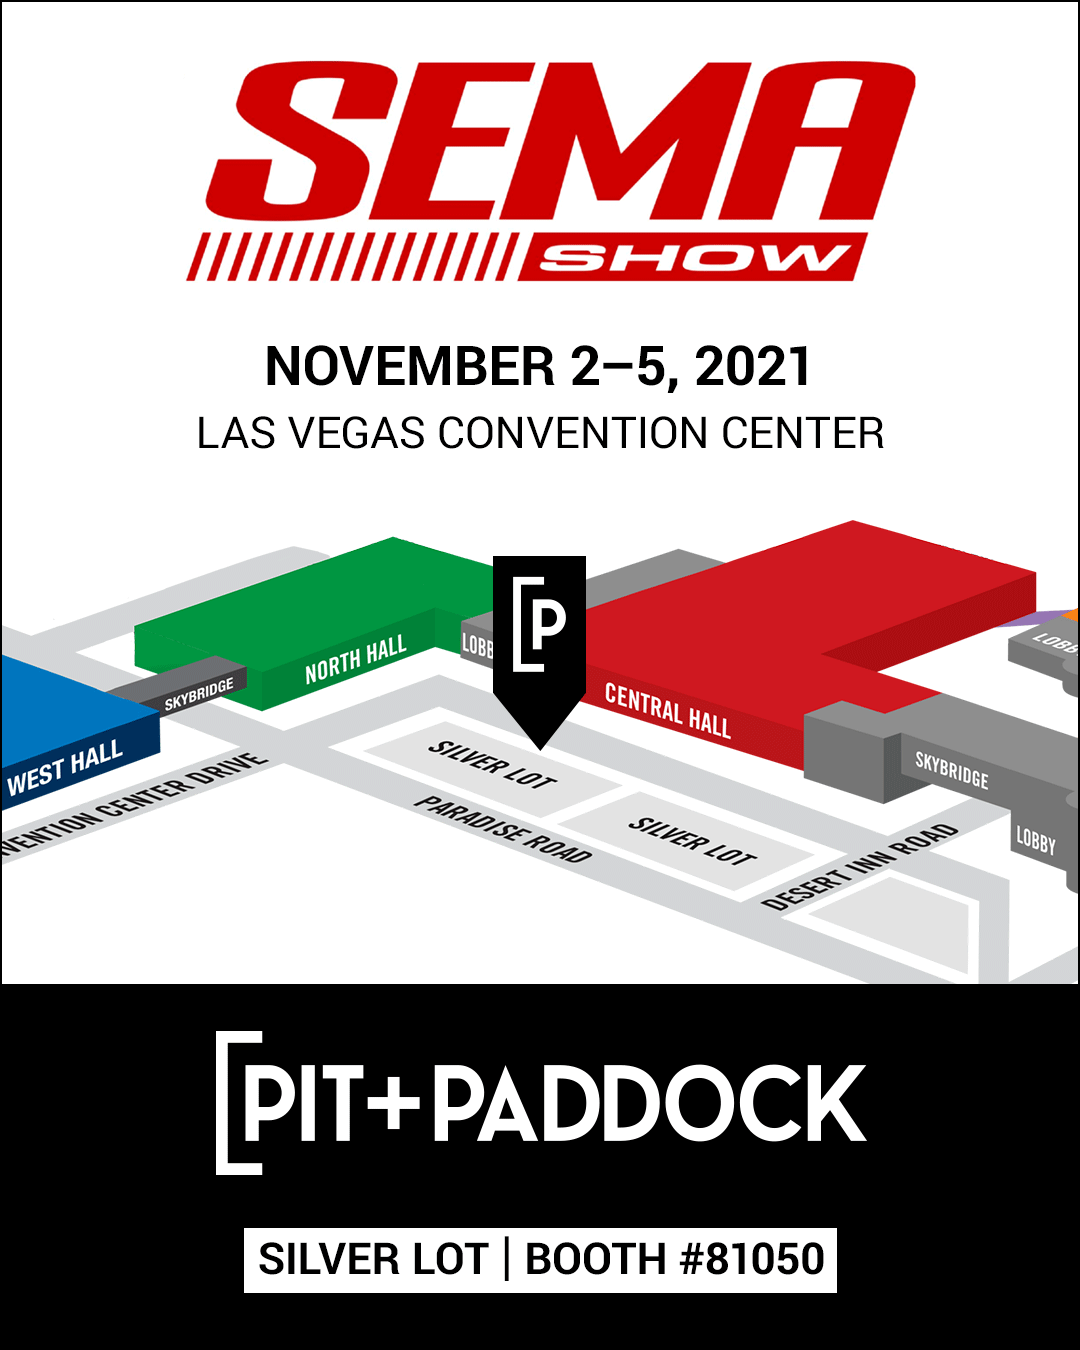 The SEMA Show is Back, and Pit+Paddock is Exhibiting for the First Time